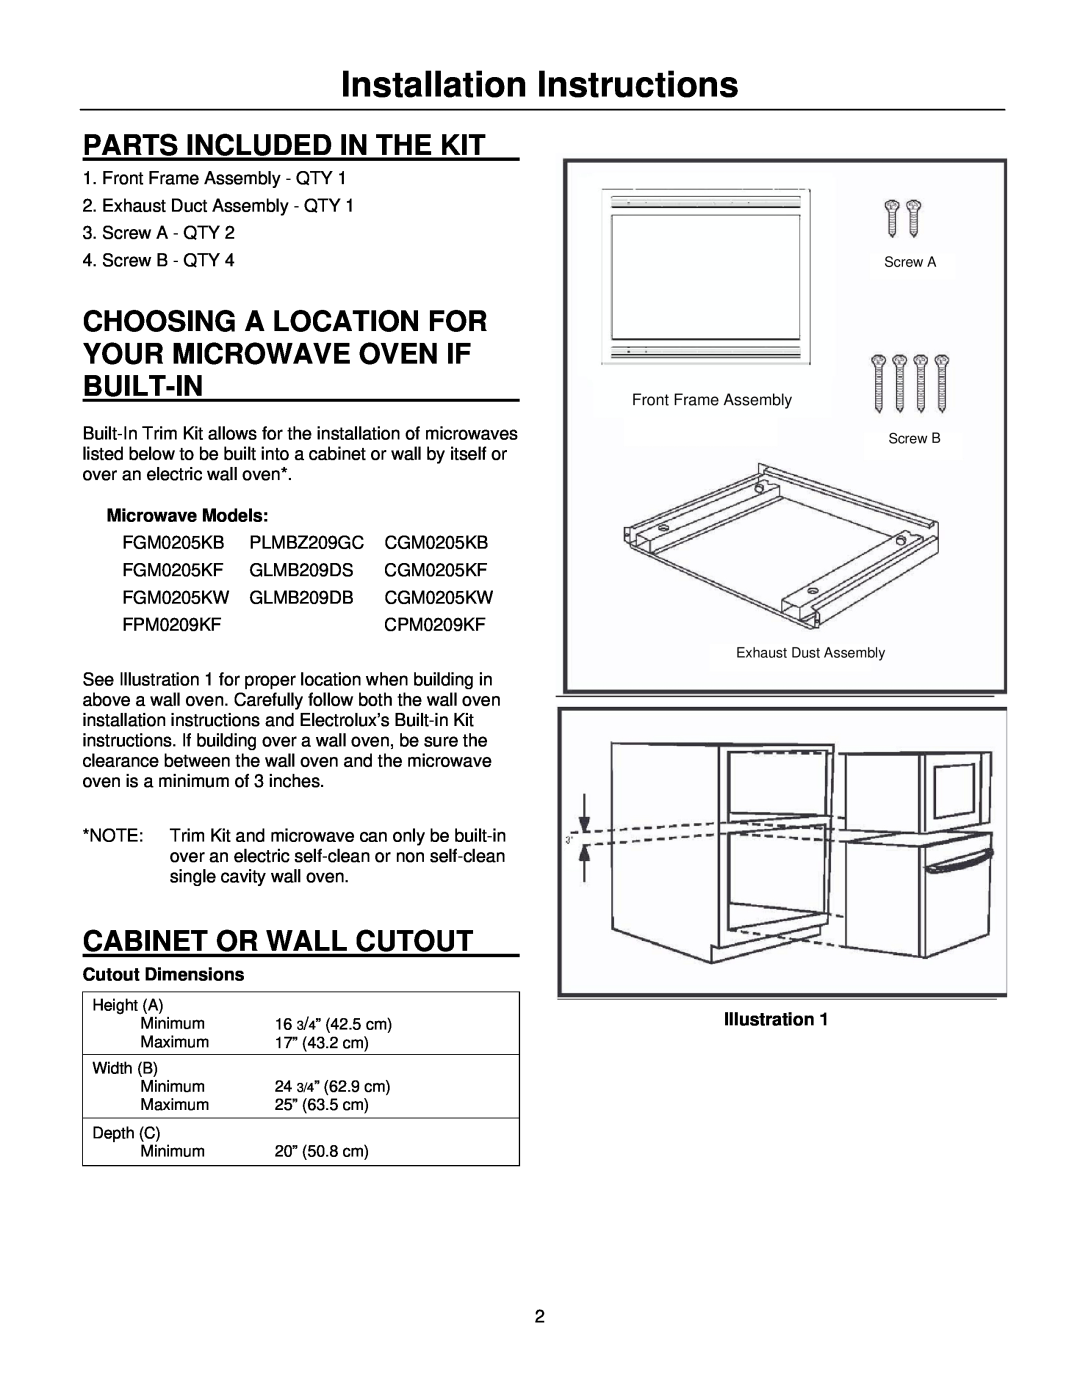 Frigidaire MWTK(P)27K Installation Instructions, Parts Included In The Kit, Cabinet Or Wall Cutout, Microwave Models 